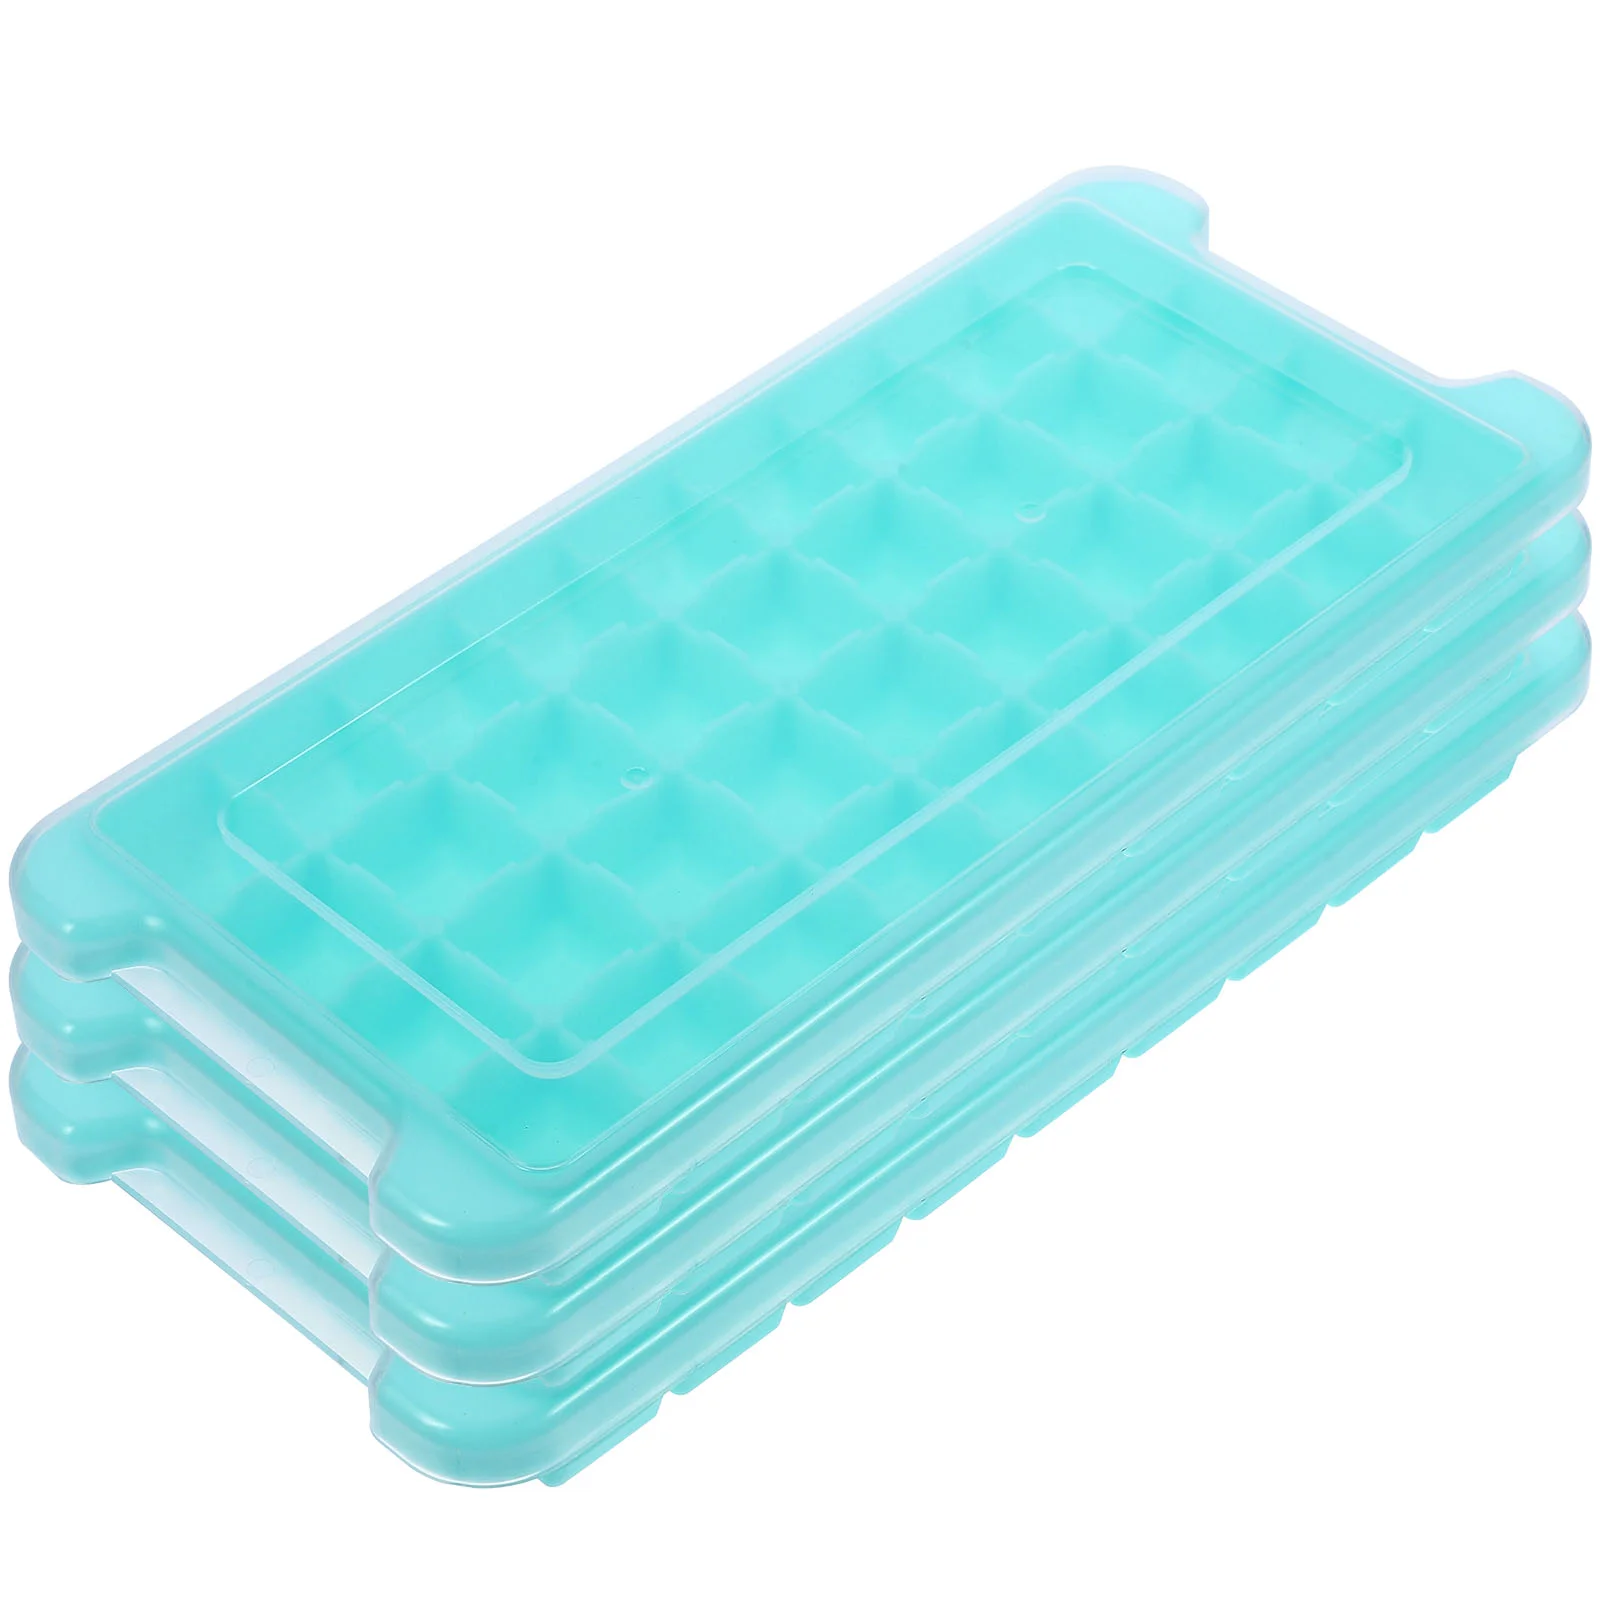 

3 Pcs Ice Making Tray Silicone Molds Cube Convenient Freezer Silica Gel Wear-resistant DIY Household Ball